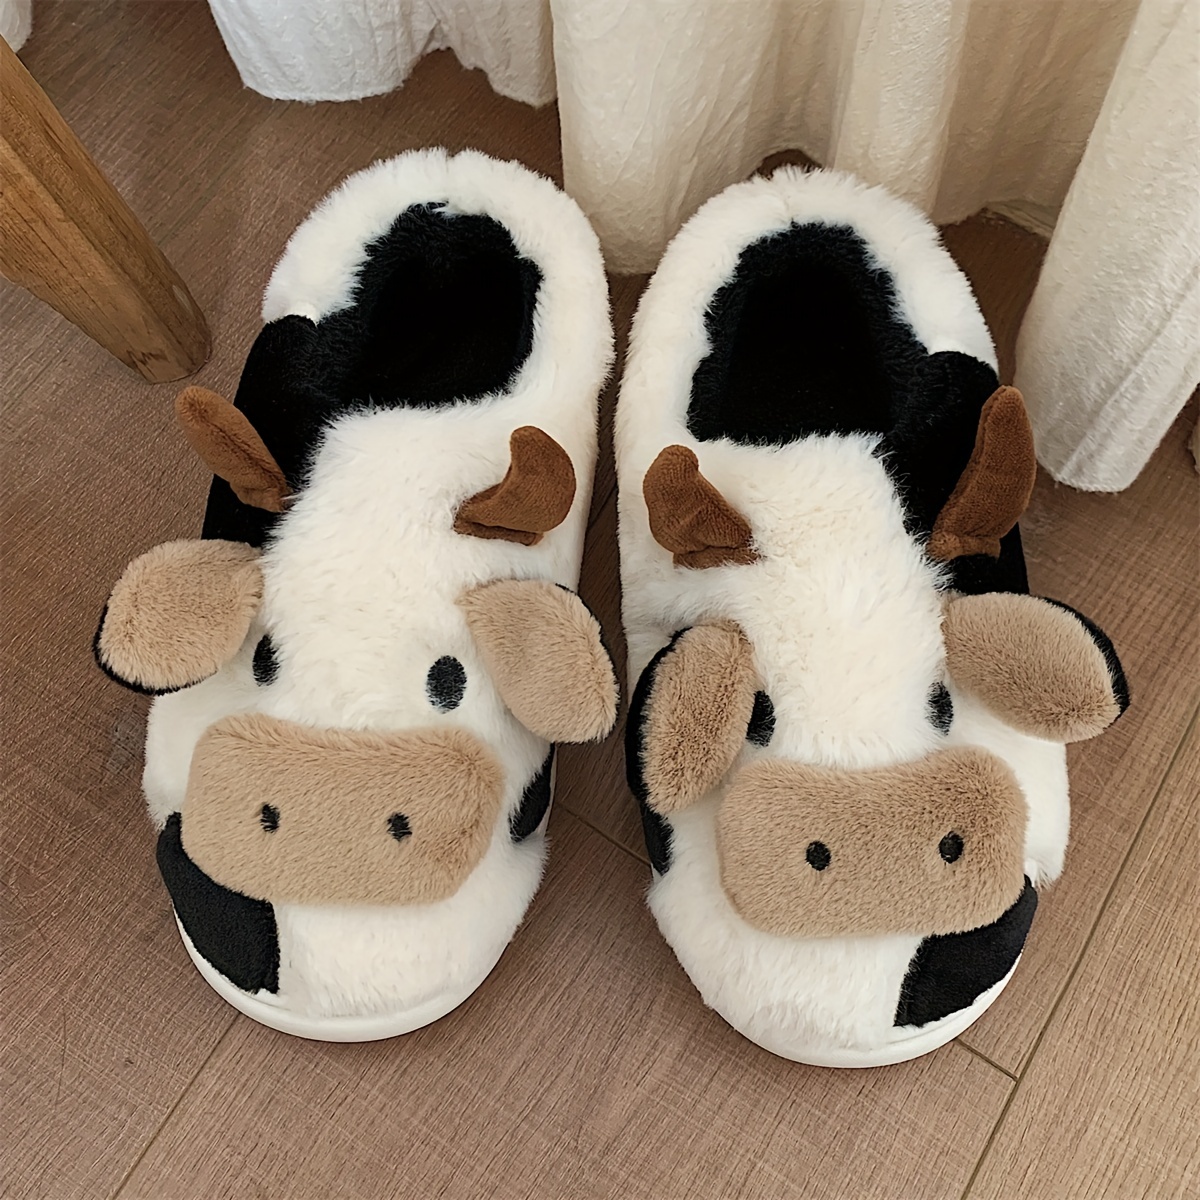 

Women's Cow Plush Novelty Slippers, Kawai Closed Toe Warm & Cozy Fluffy Shoes, Indoor Mute Bedroom Slippers